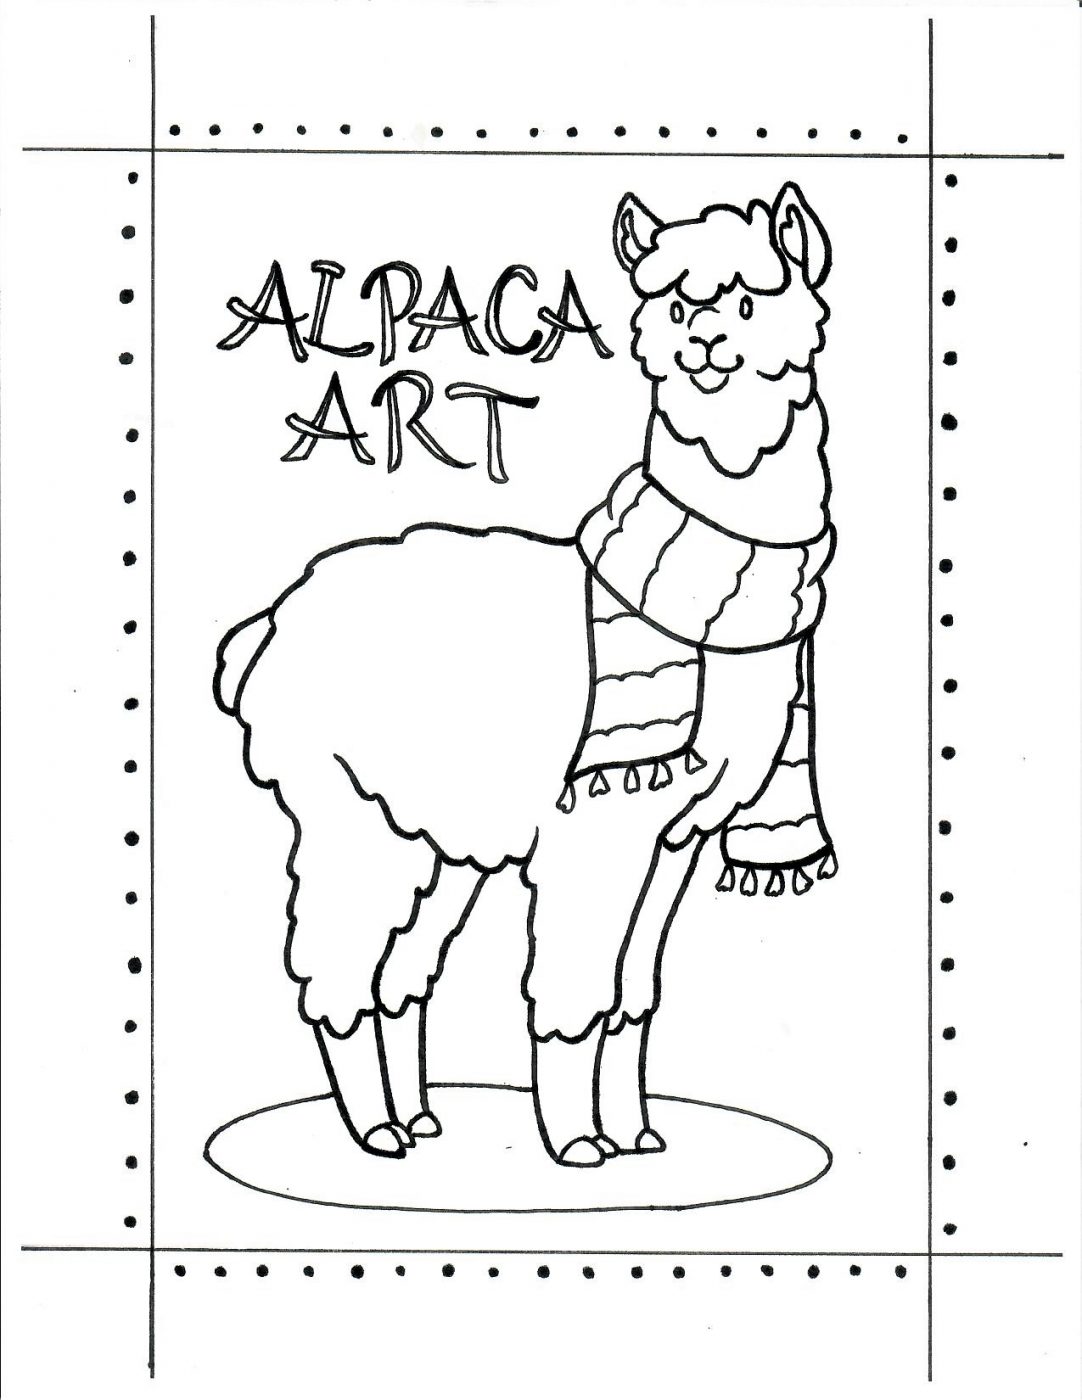 Coloring pages